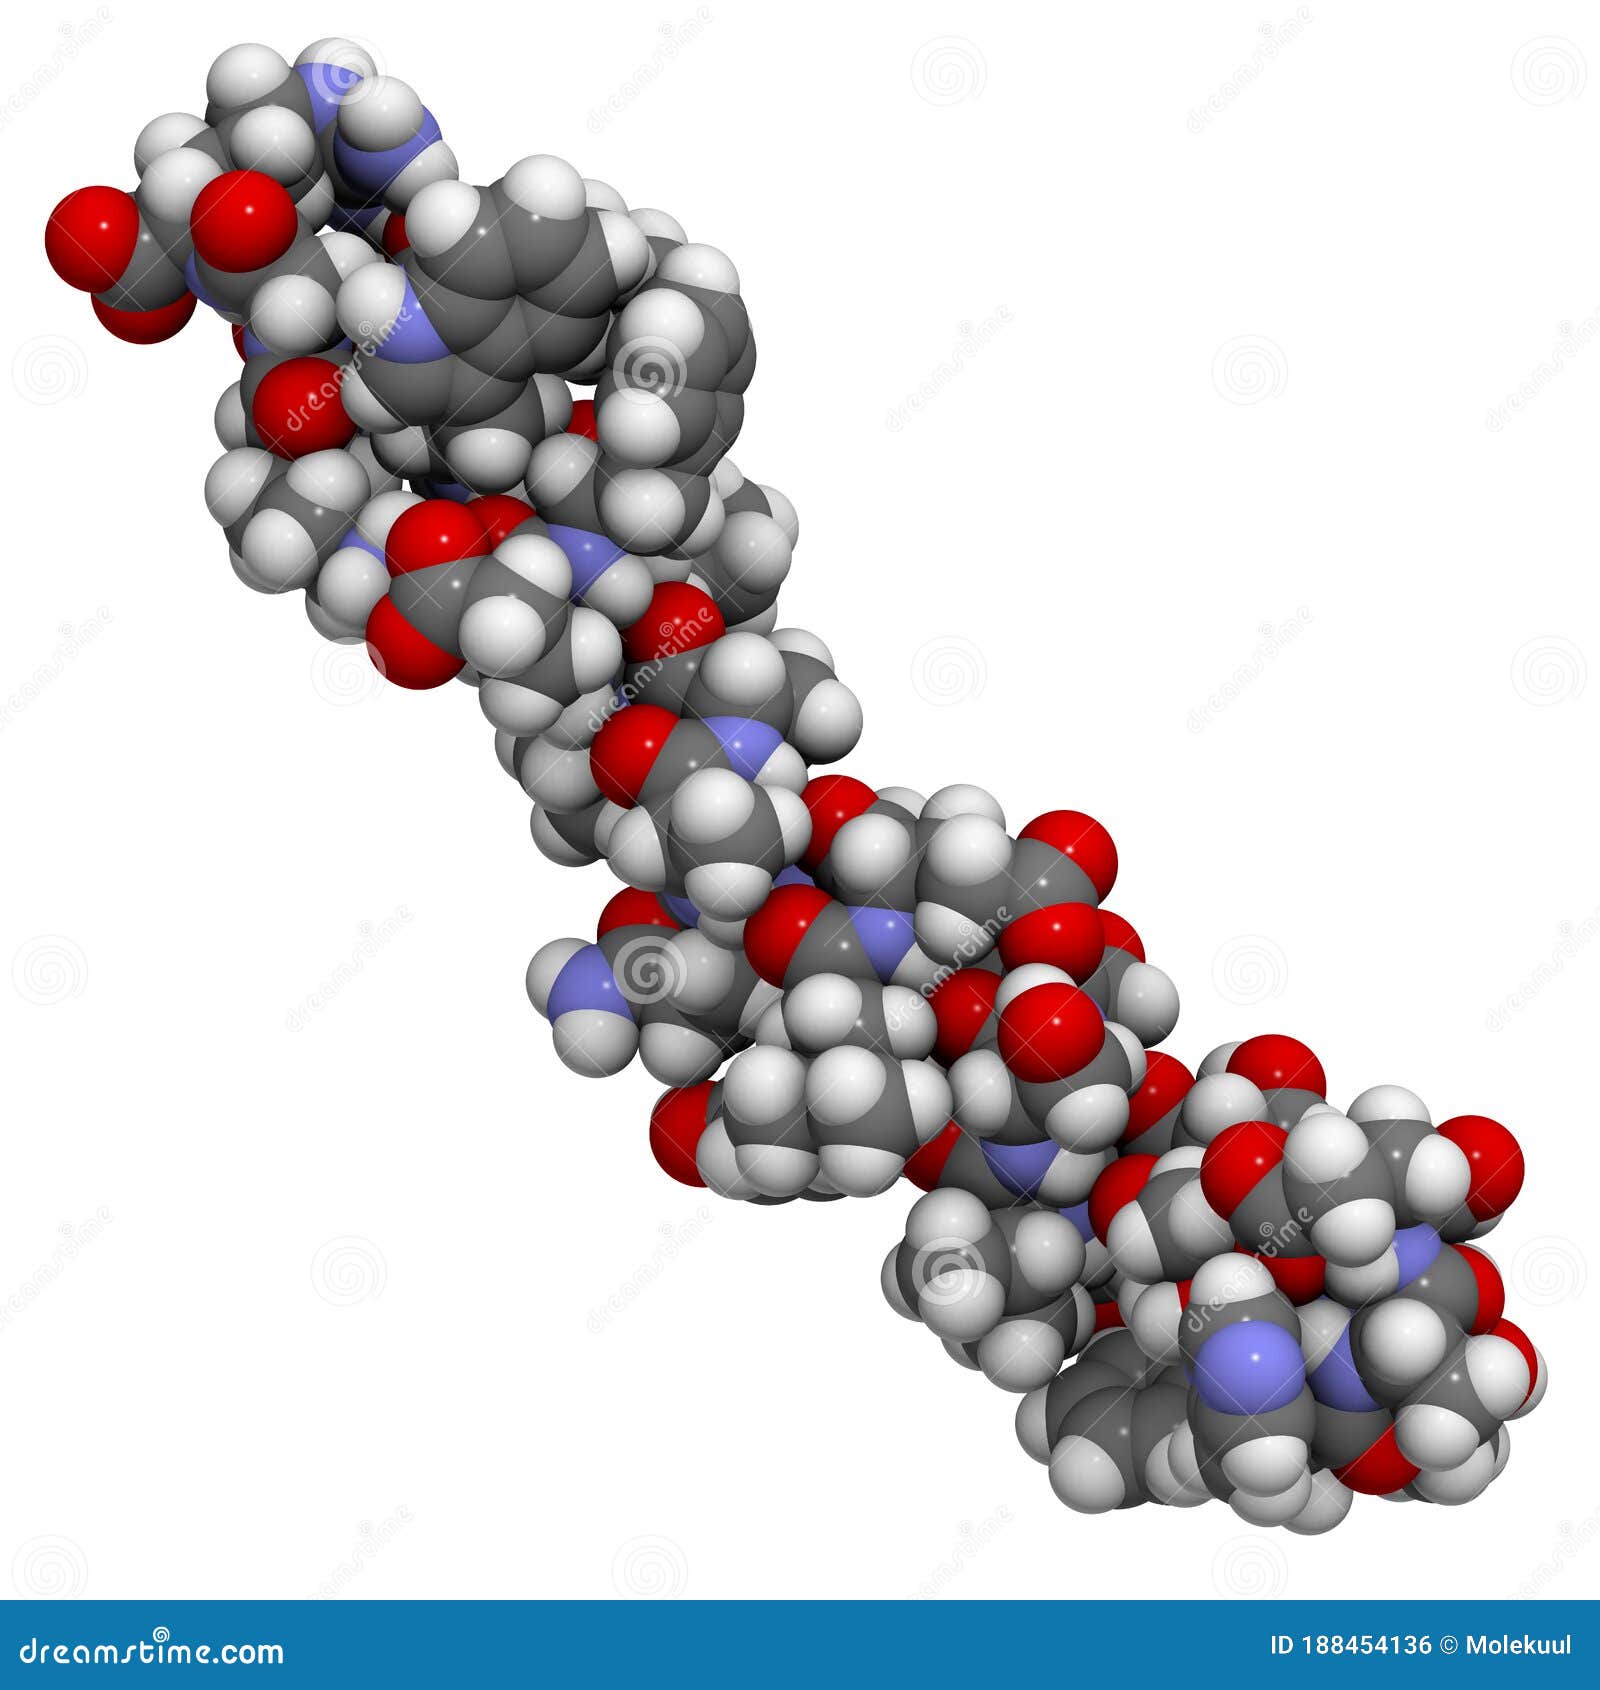 glucagon-like peptide 1 (glp1, 7-36) molecule, 3d rendering. atoms are represented as spheres with conventional color coding: